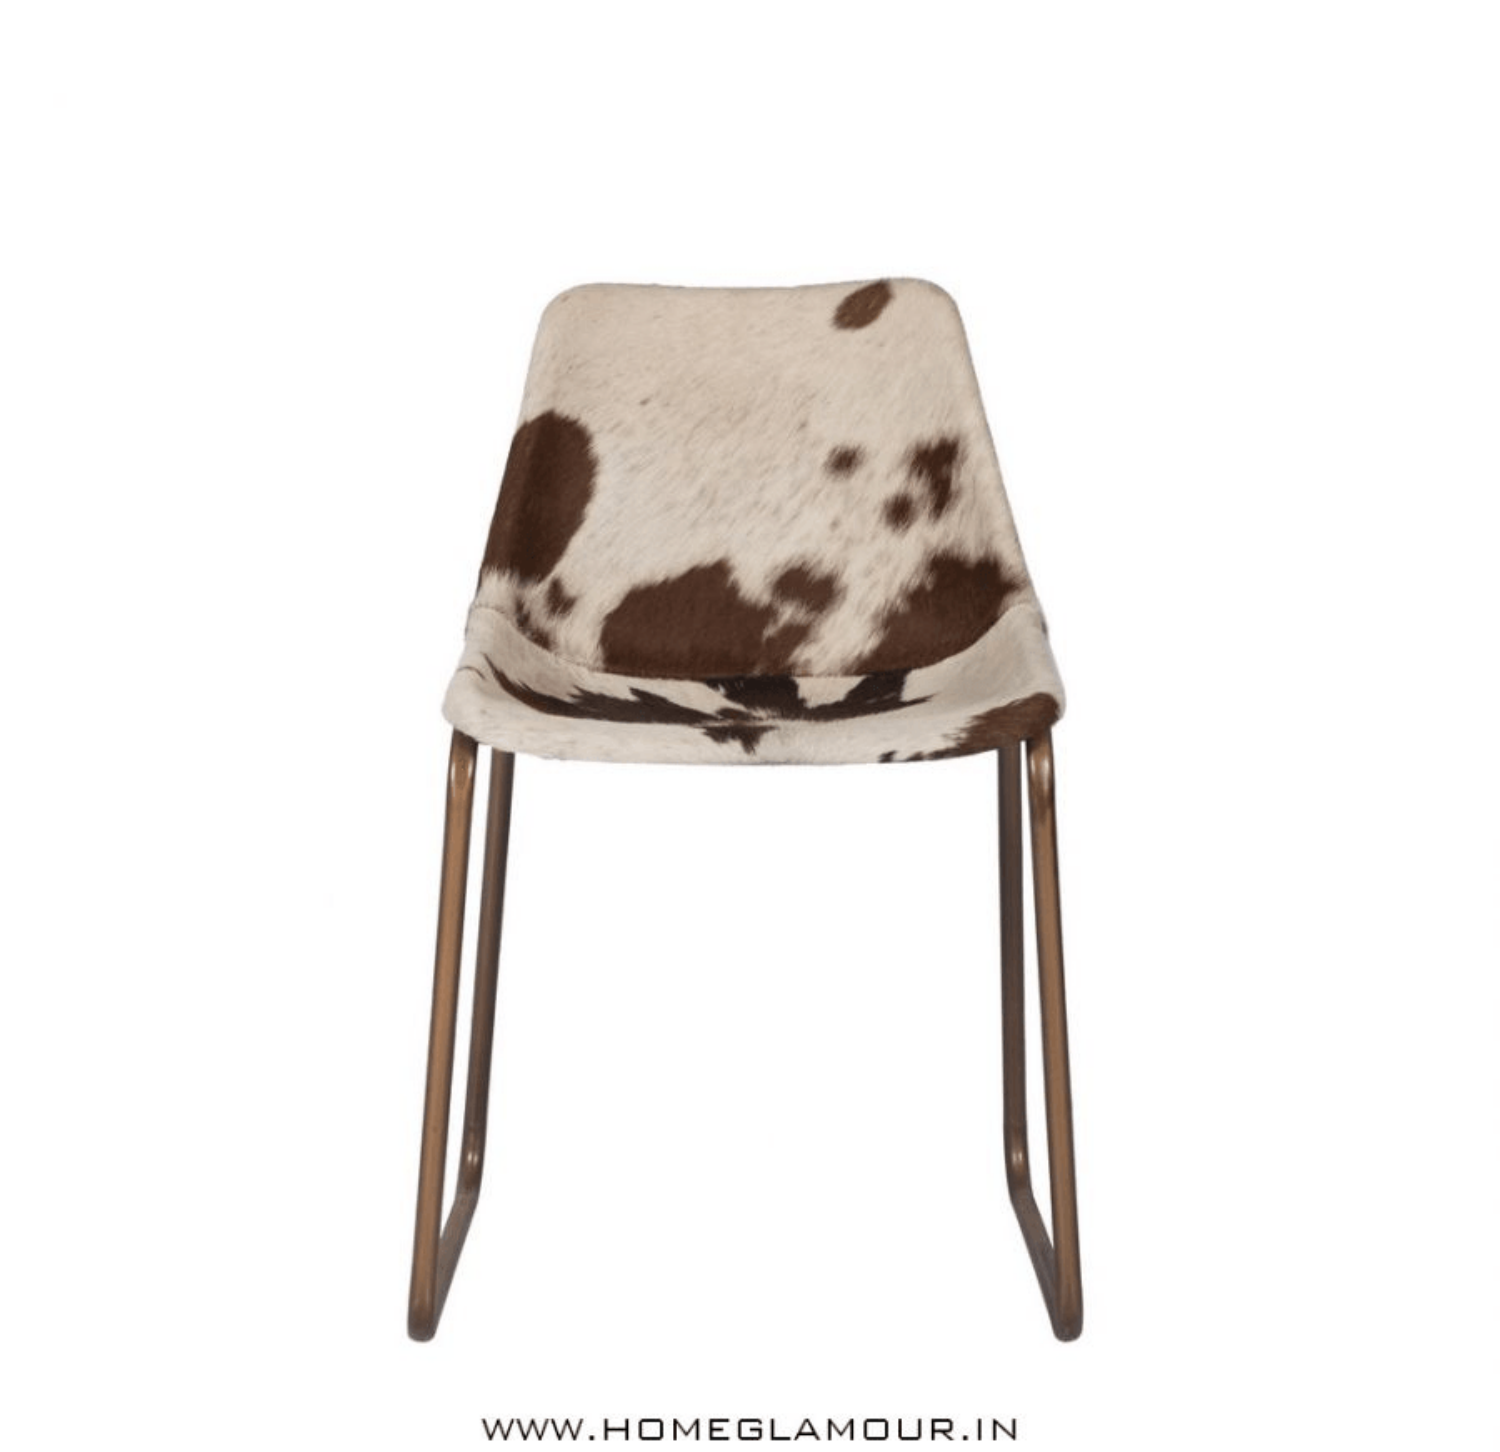 Hair on leather chairs online india